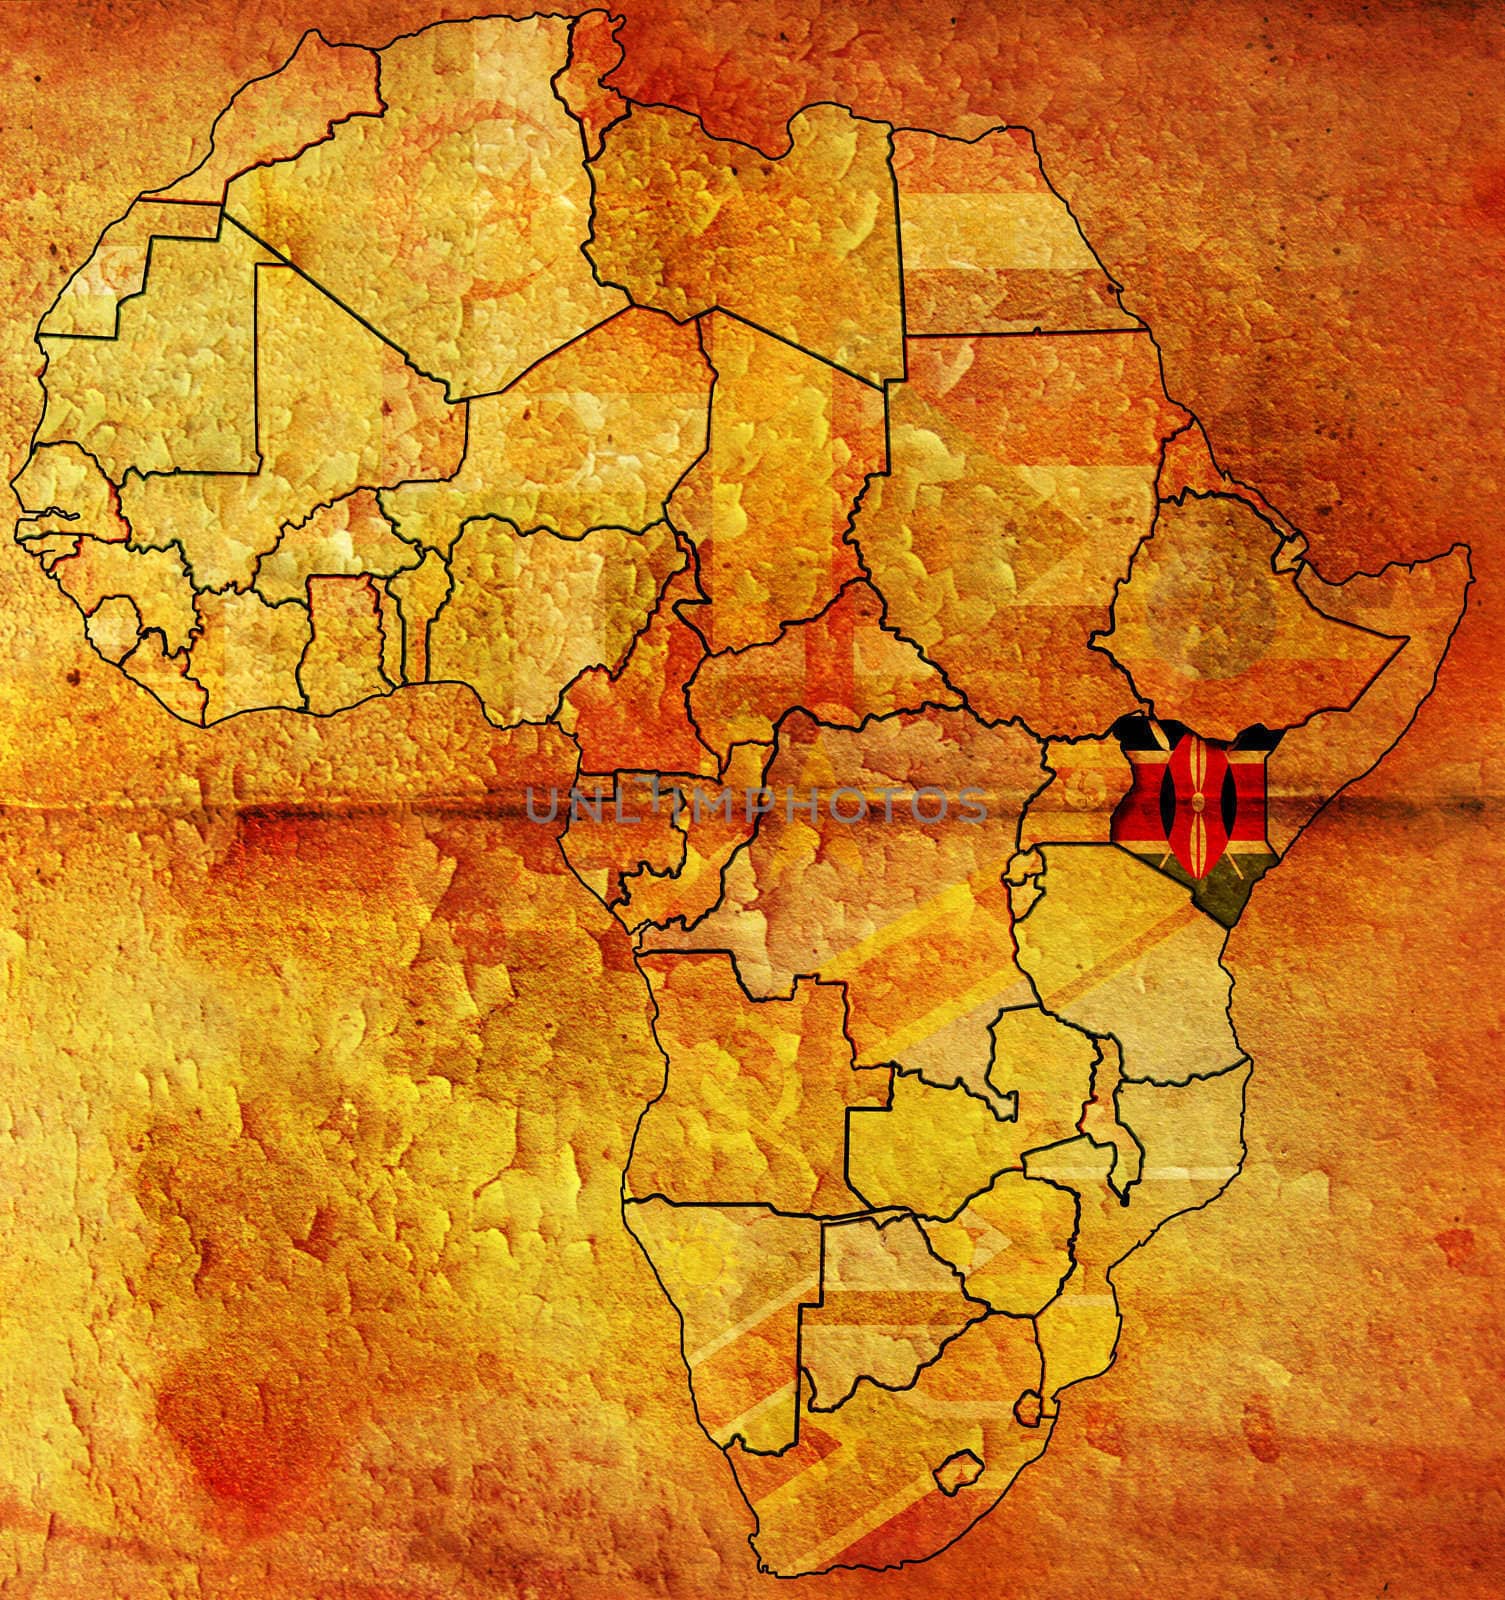 kenya on africa map by michal812